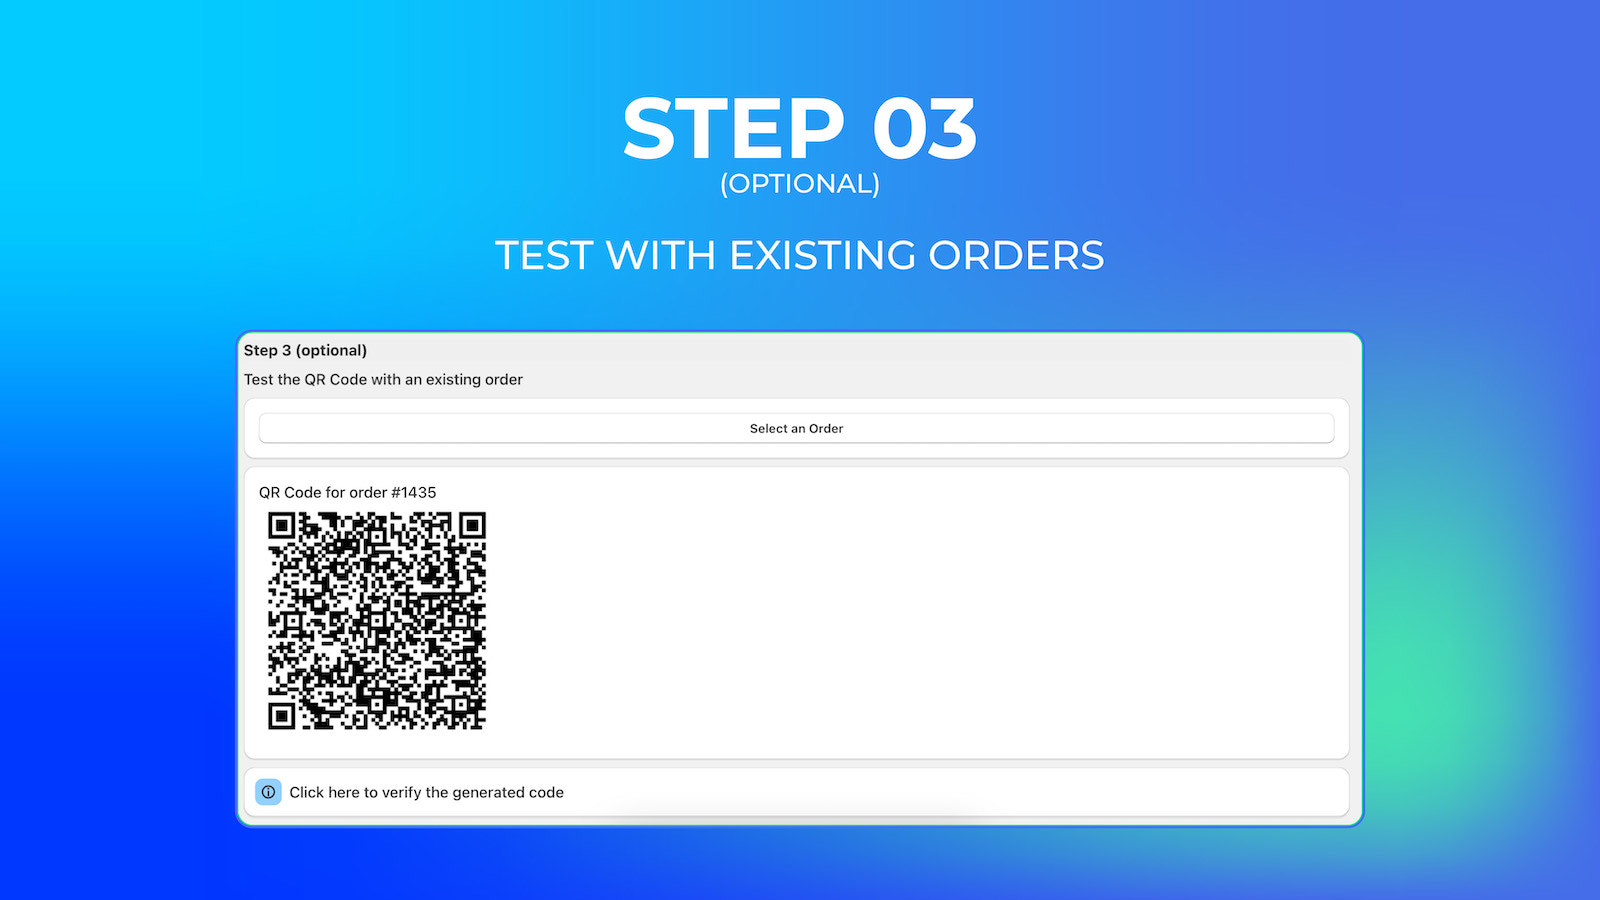 Optionally, verify QR code with an existing order